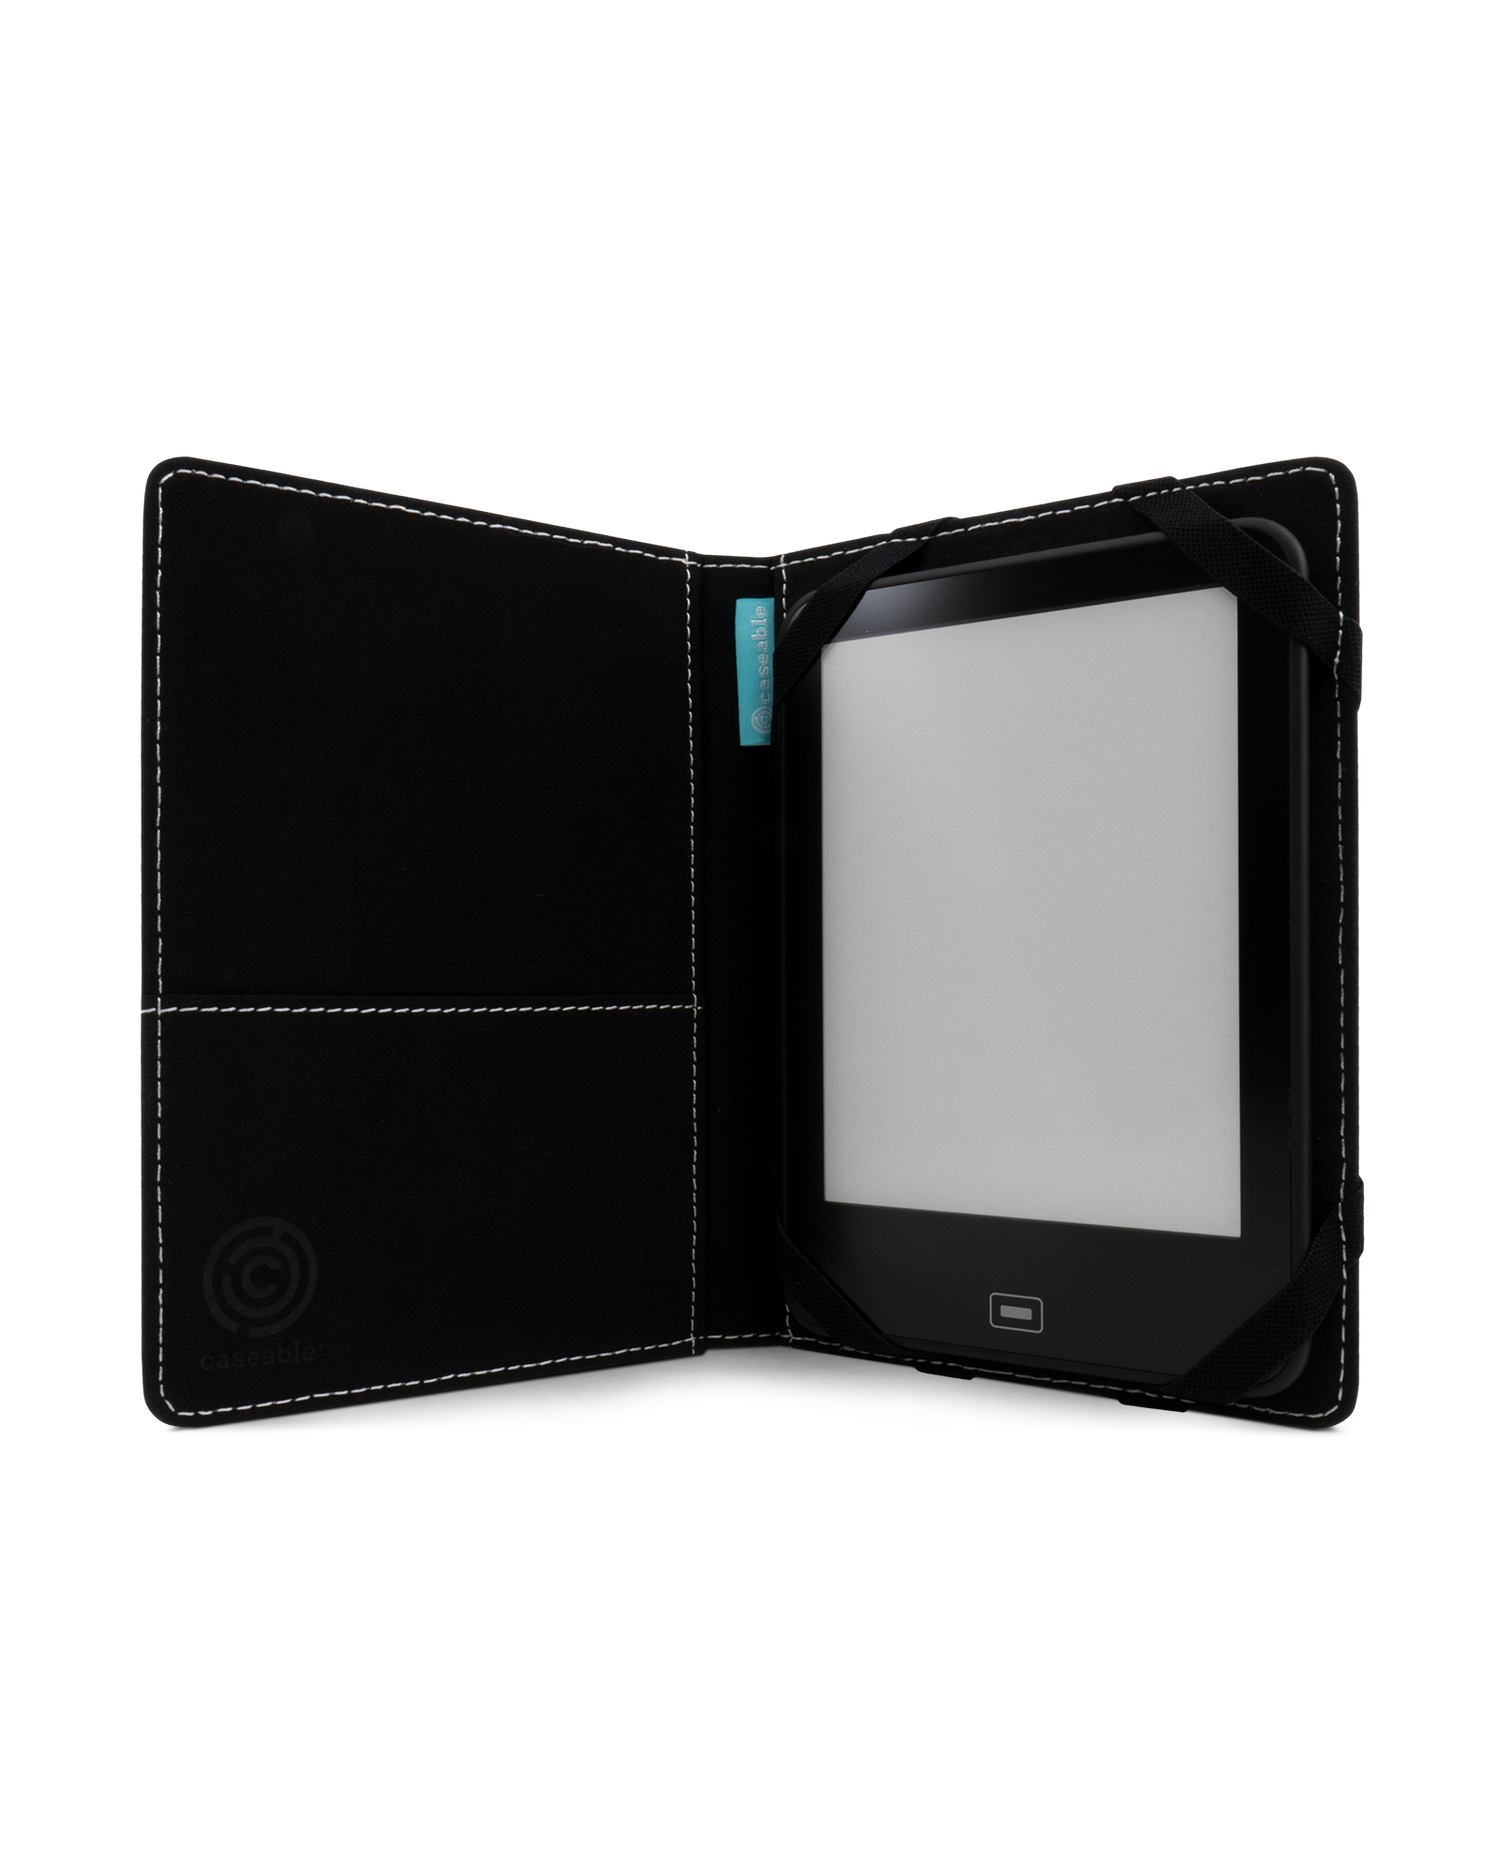 Drink Coffee eReader Case S: Opened interior view